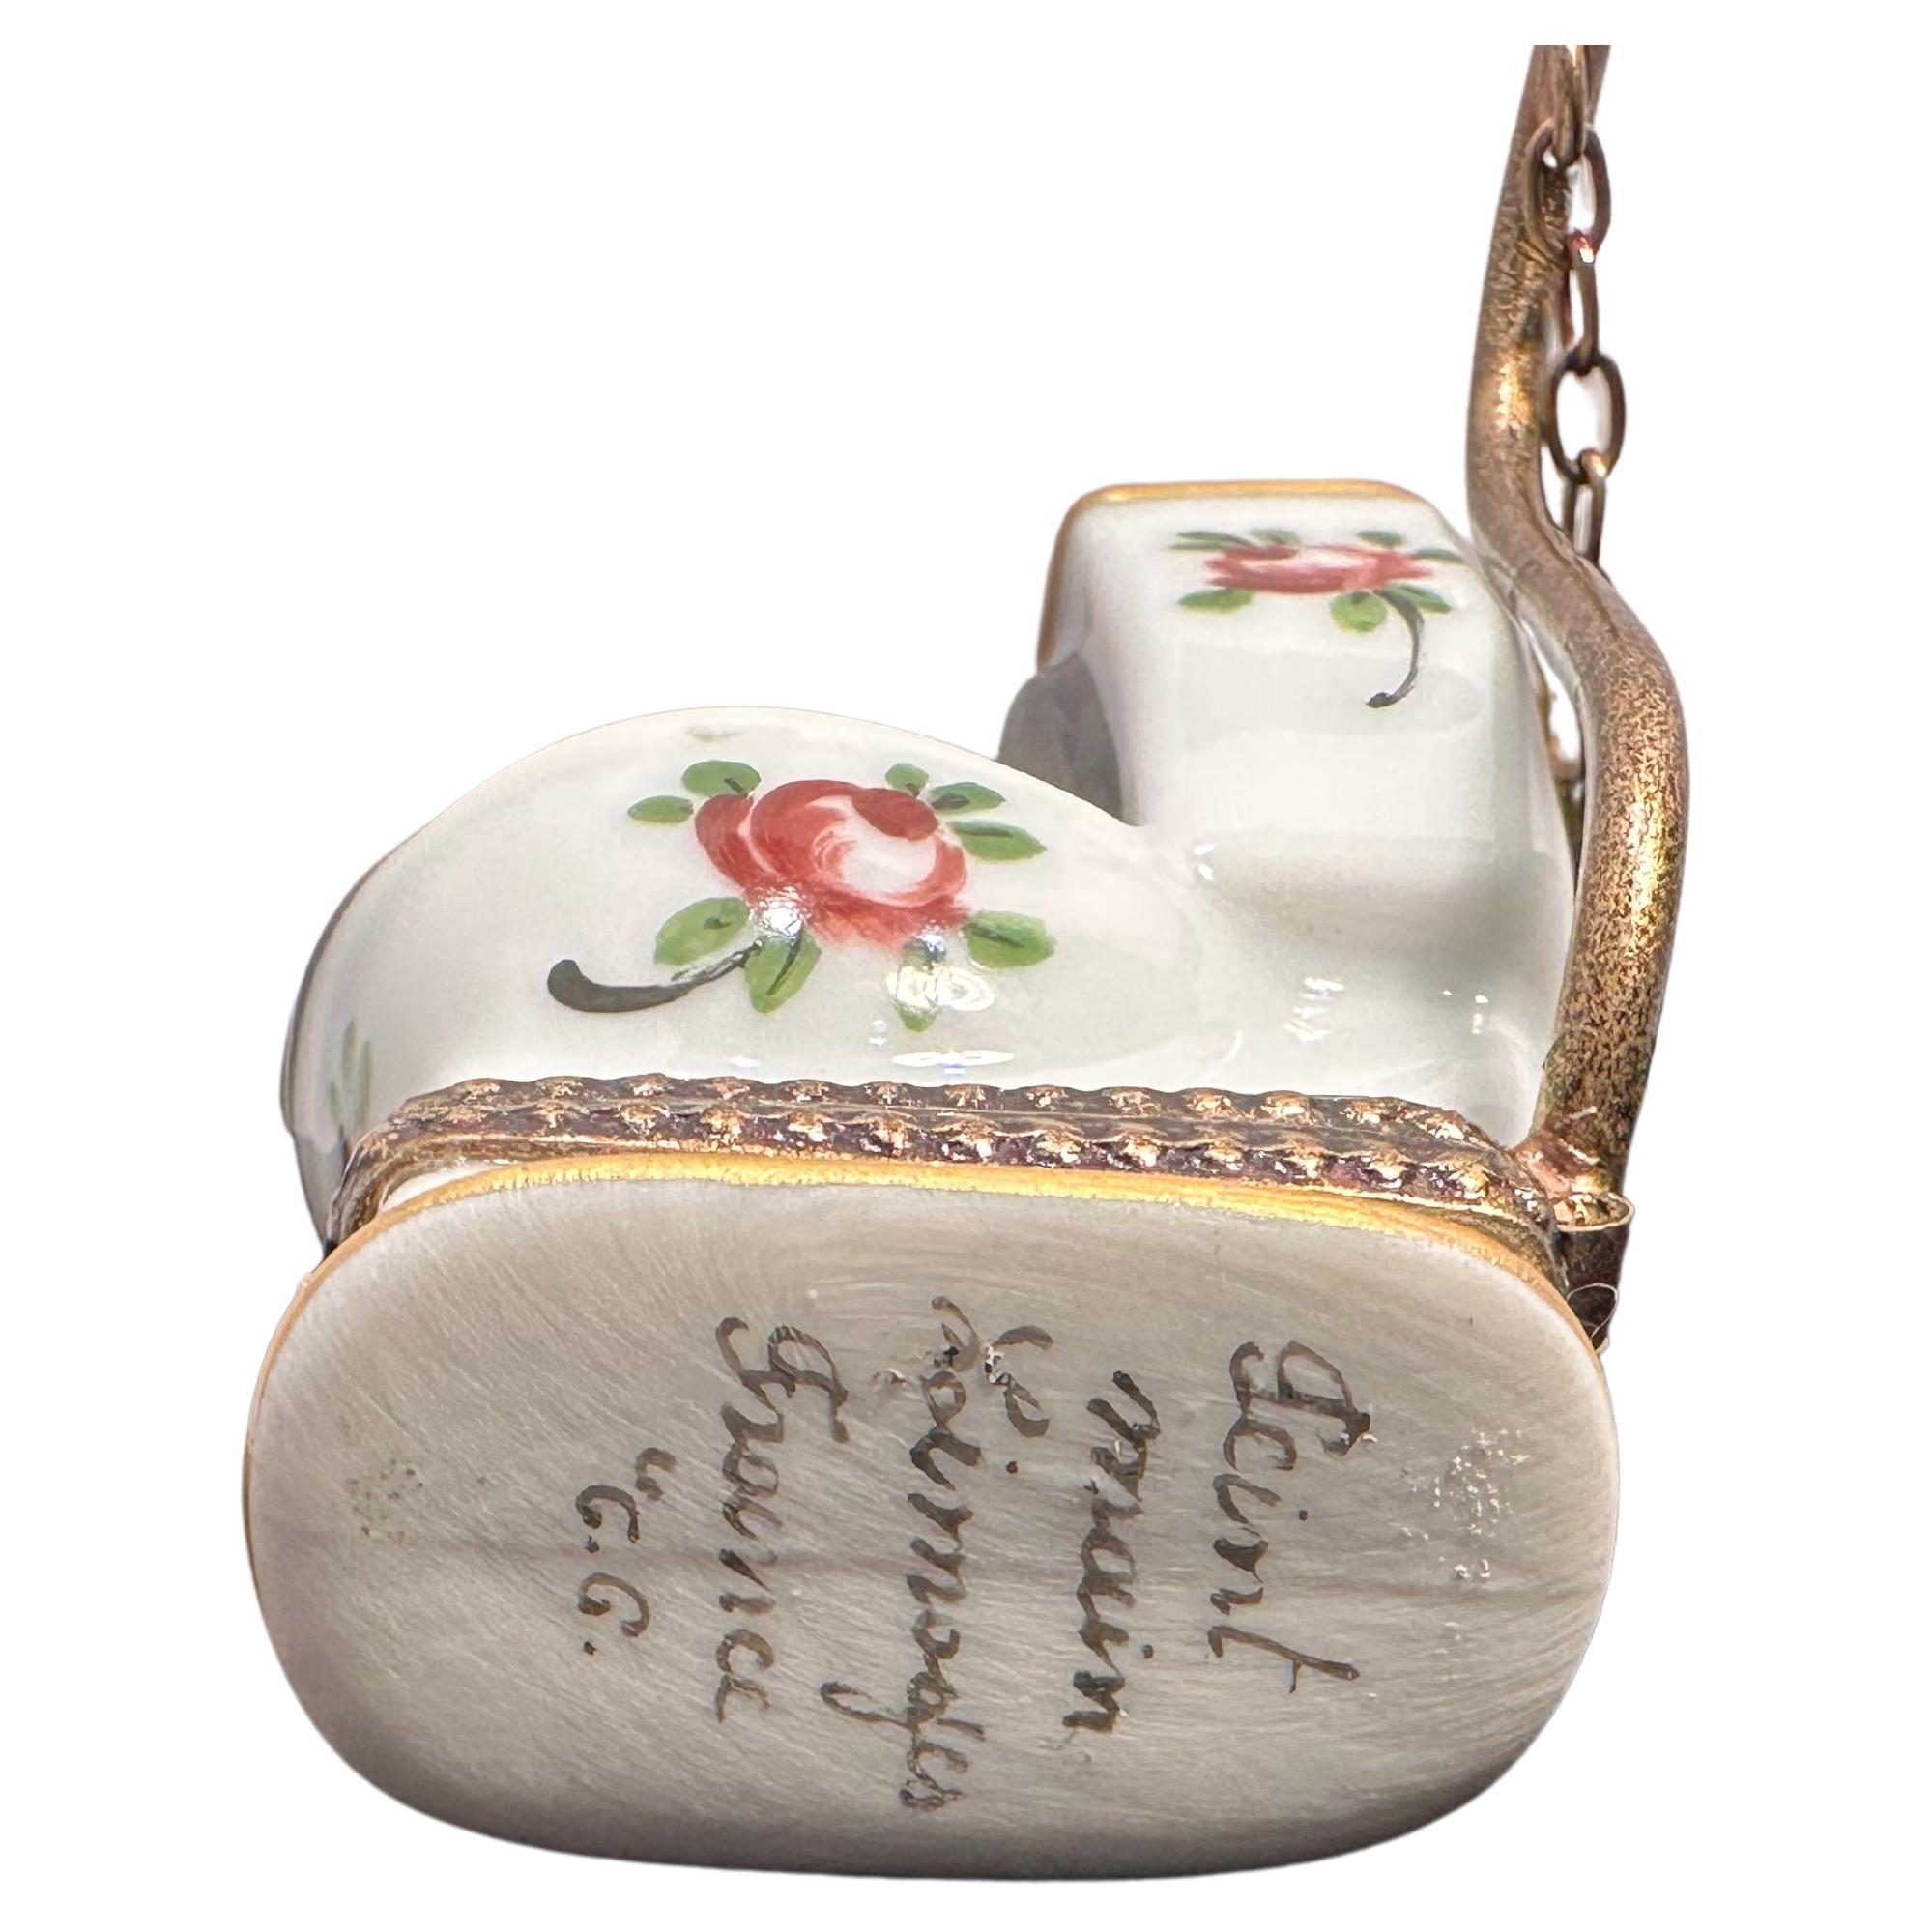 Hand-Crafted Unique Limoges France Toilet Shaped Hand Painted Porcelain Trinket Box